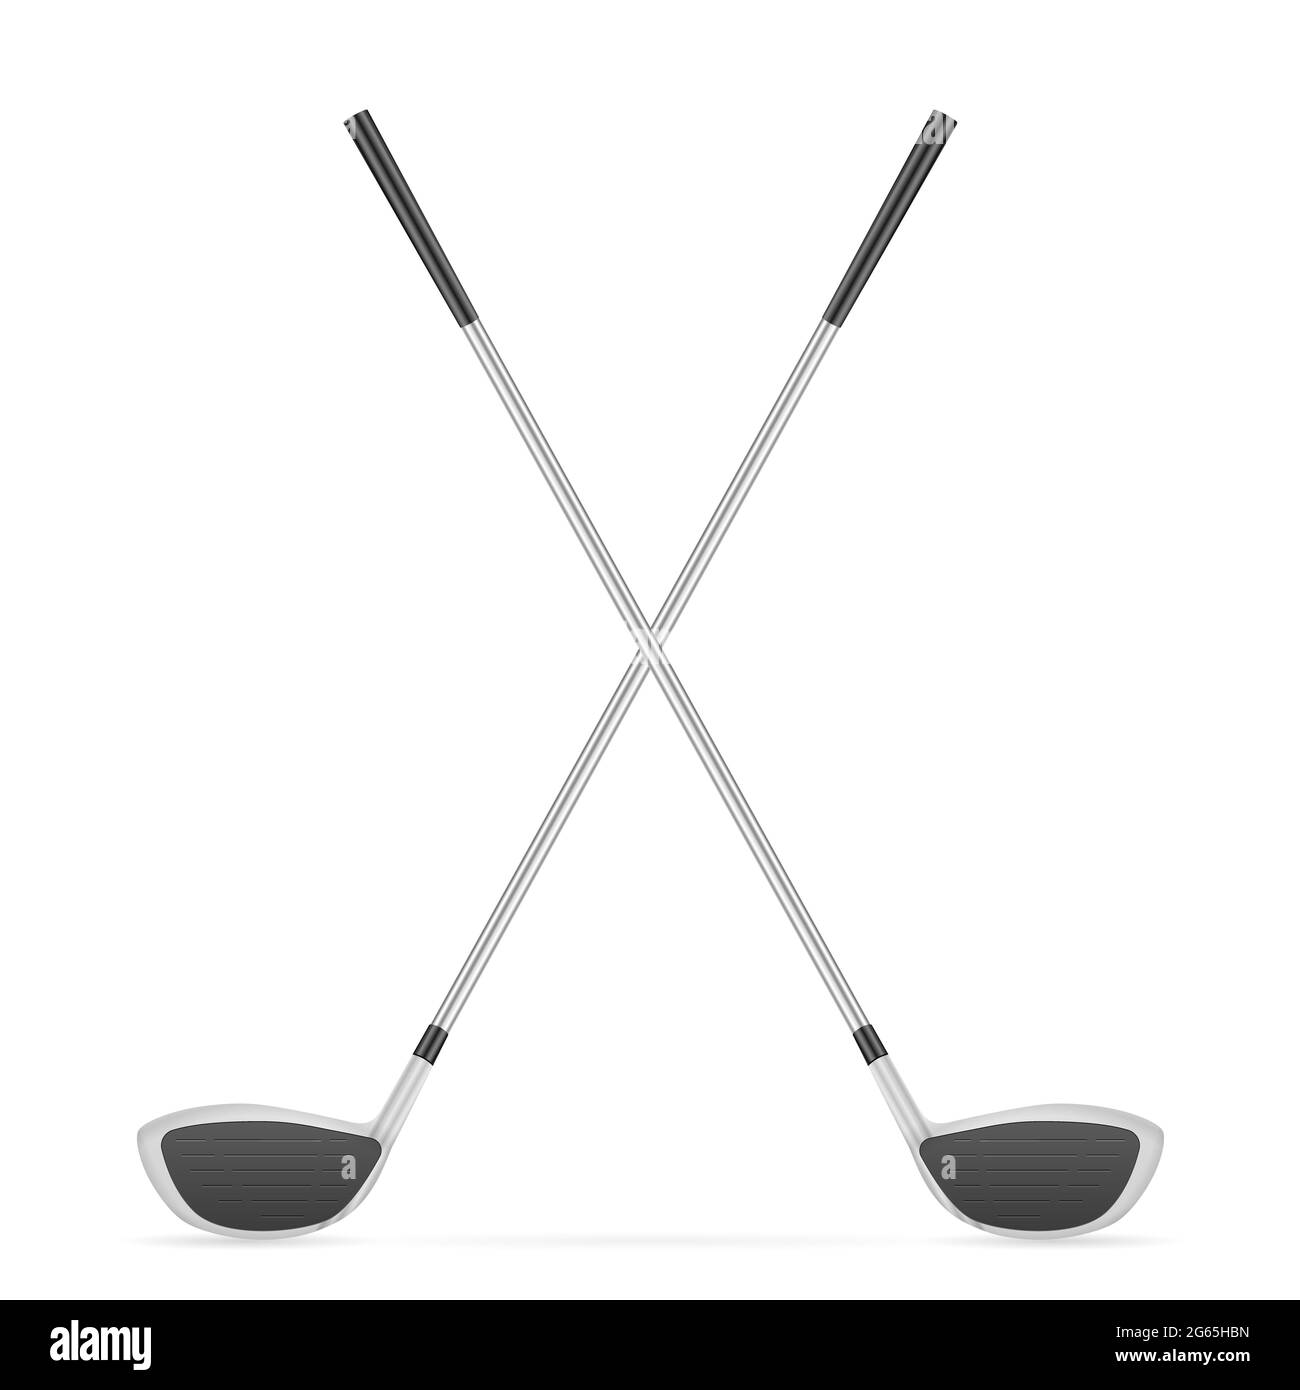 Golf clubs on a white background. Vector illustration Stock Photo